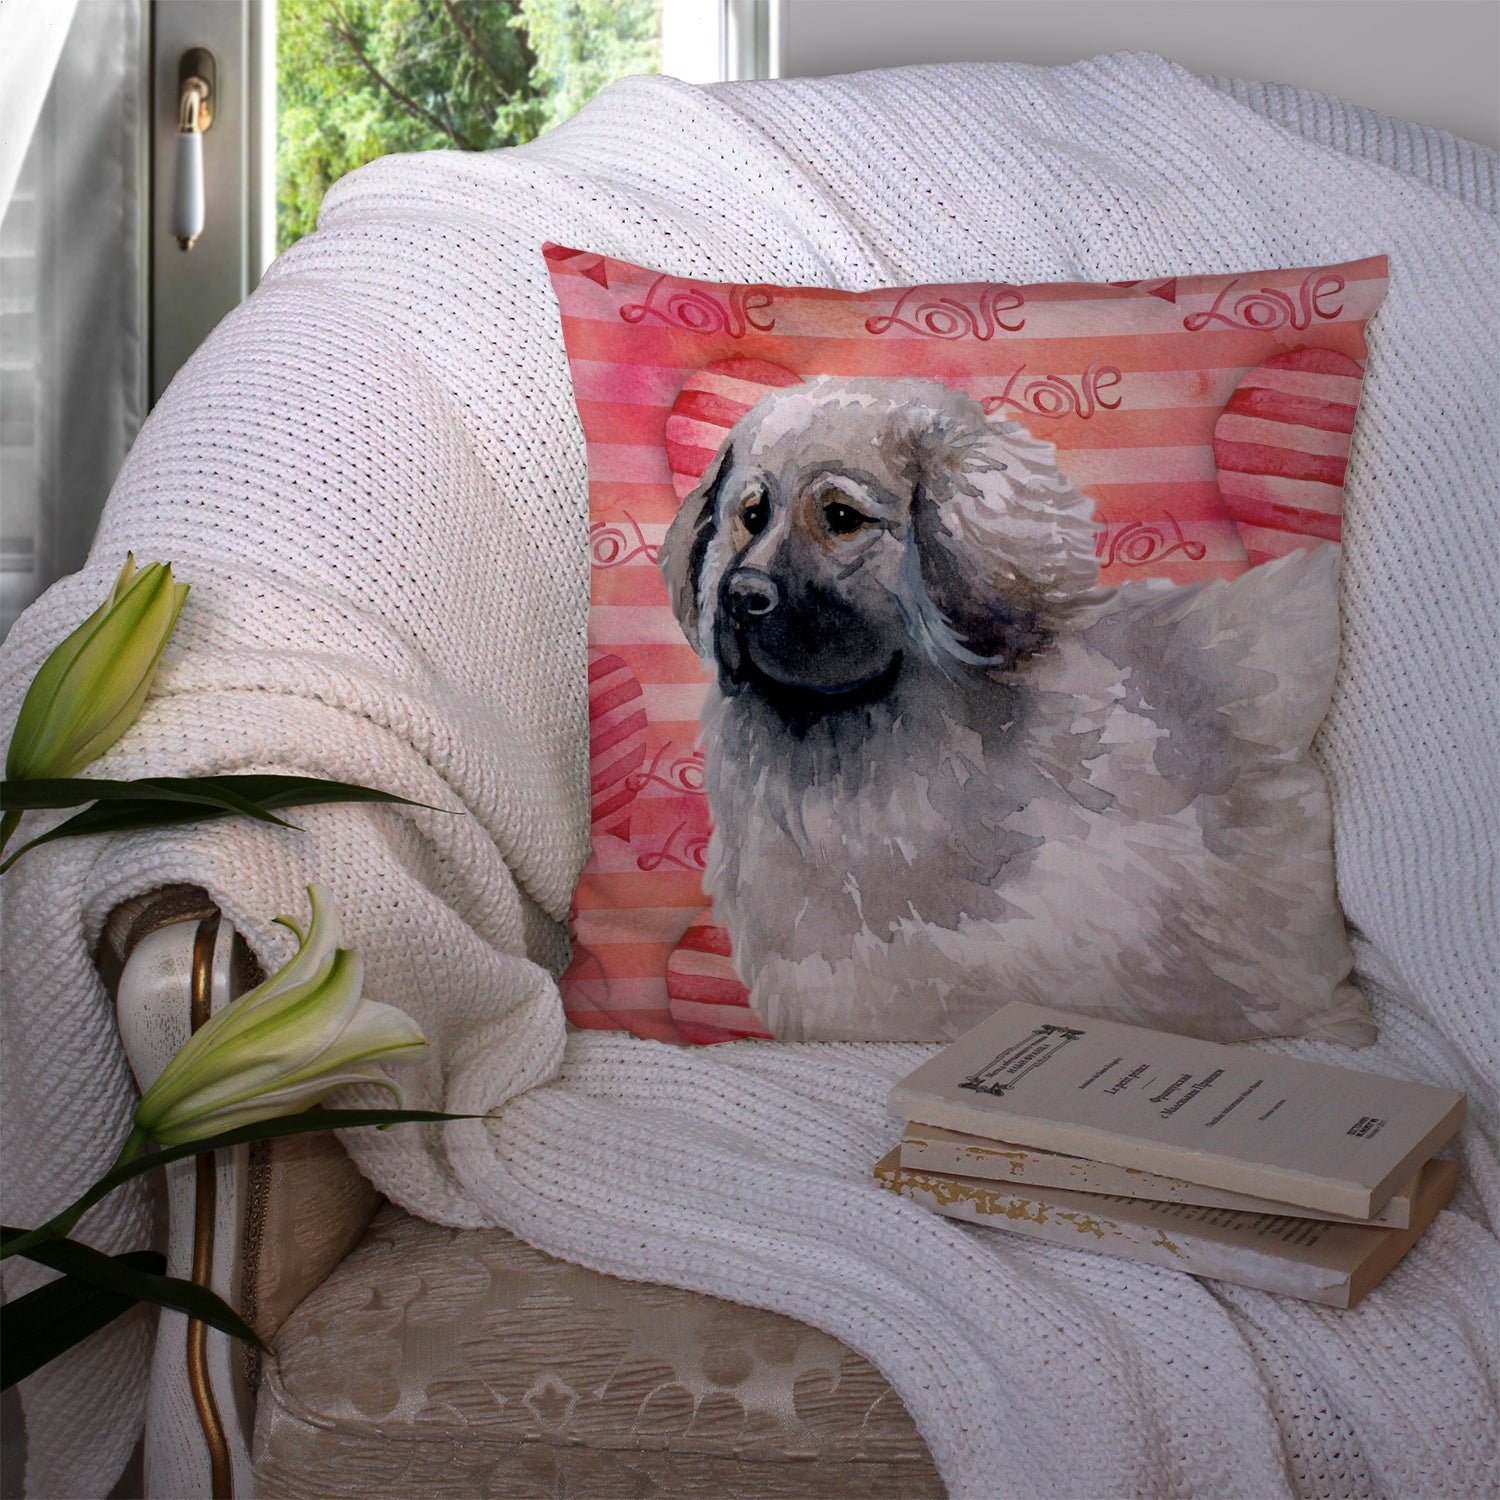 Moscow Watchdog Love Fabric Decorative Pillow BB9760PW1414 - the-store.com